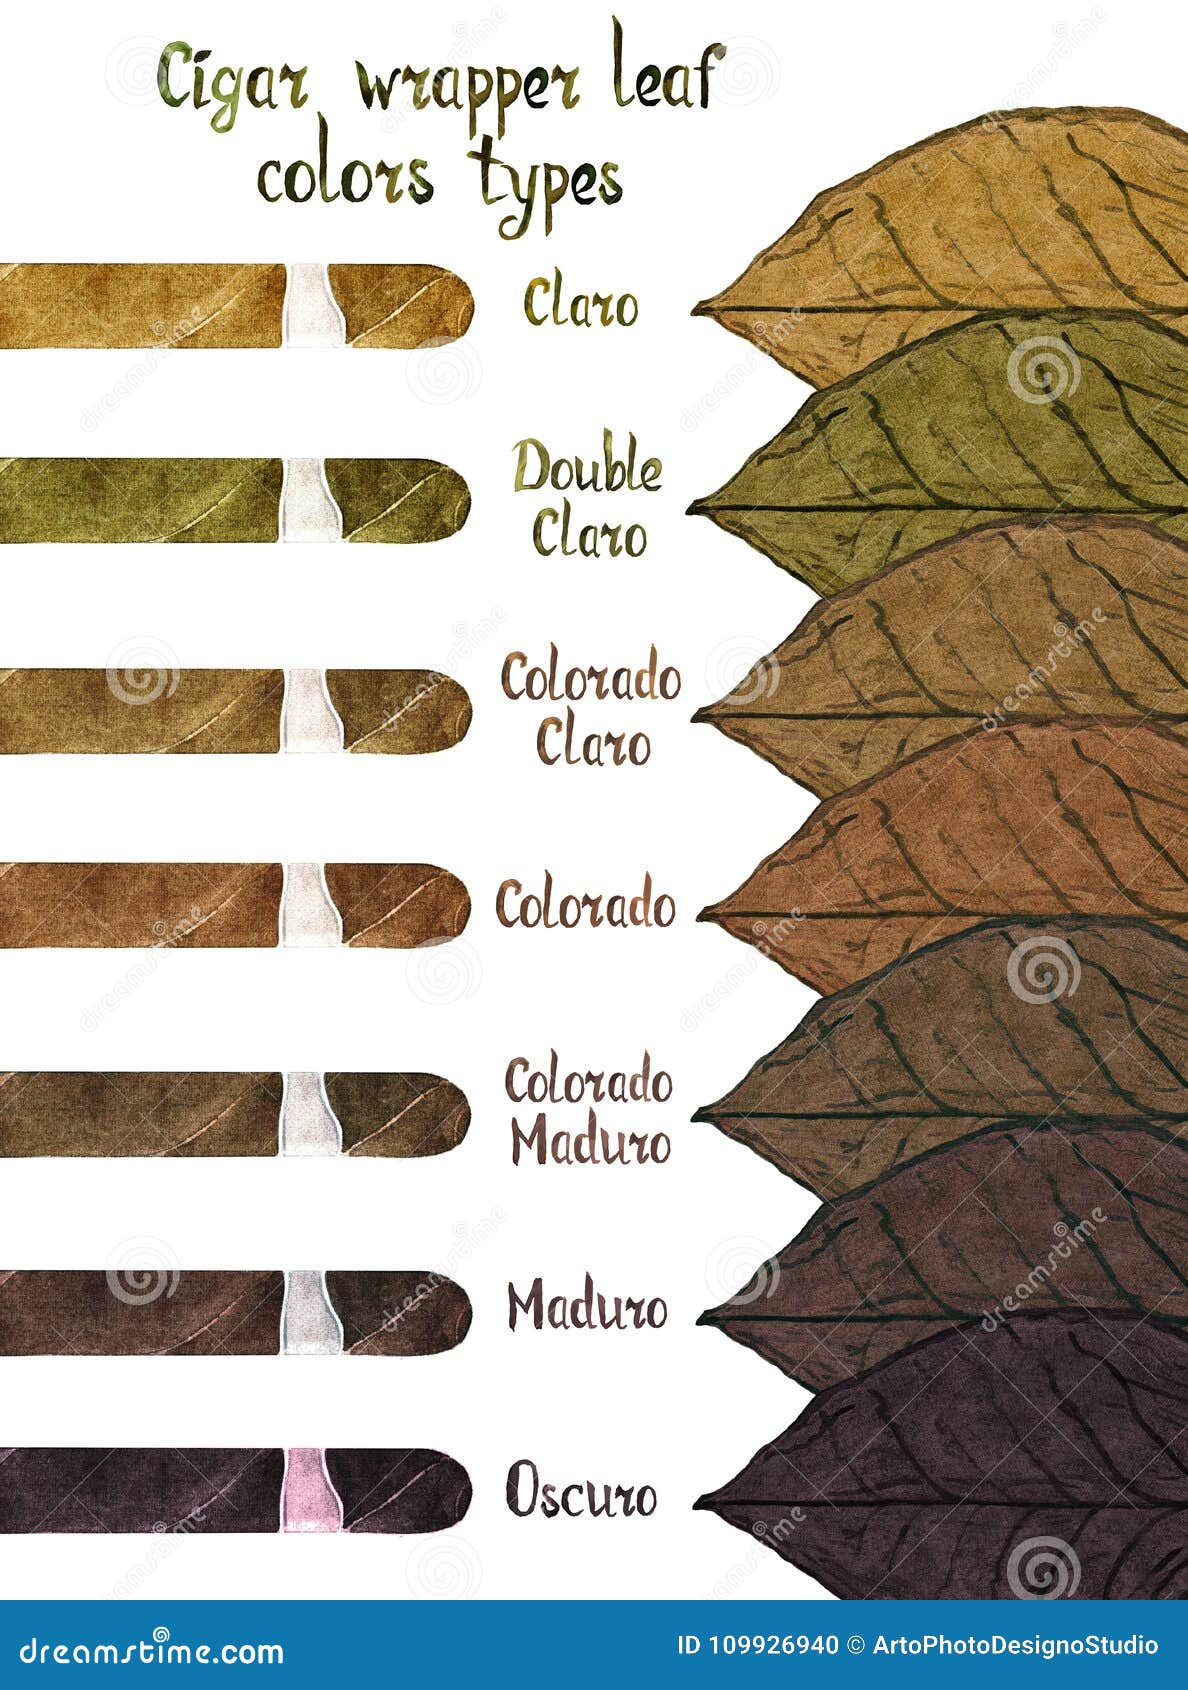 cigar wrapper leaf colors types: claro, double claro, colorado claro, colorado, colorado maduro, maduro and oscuro